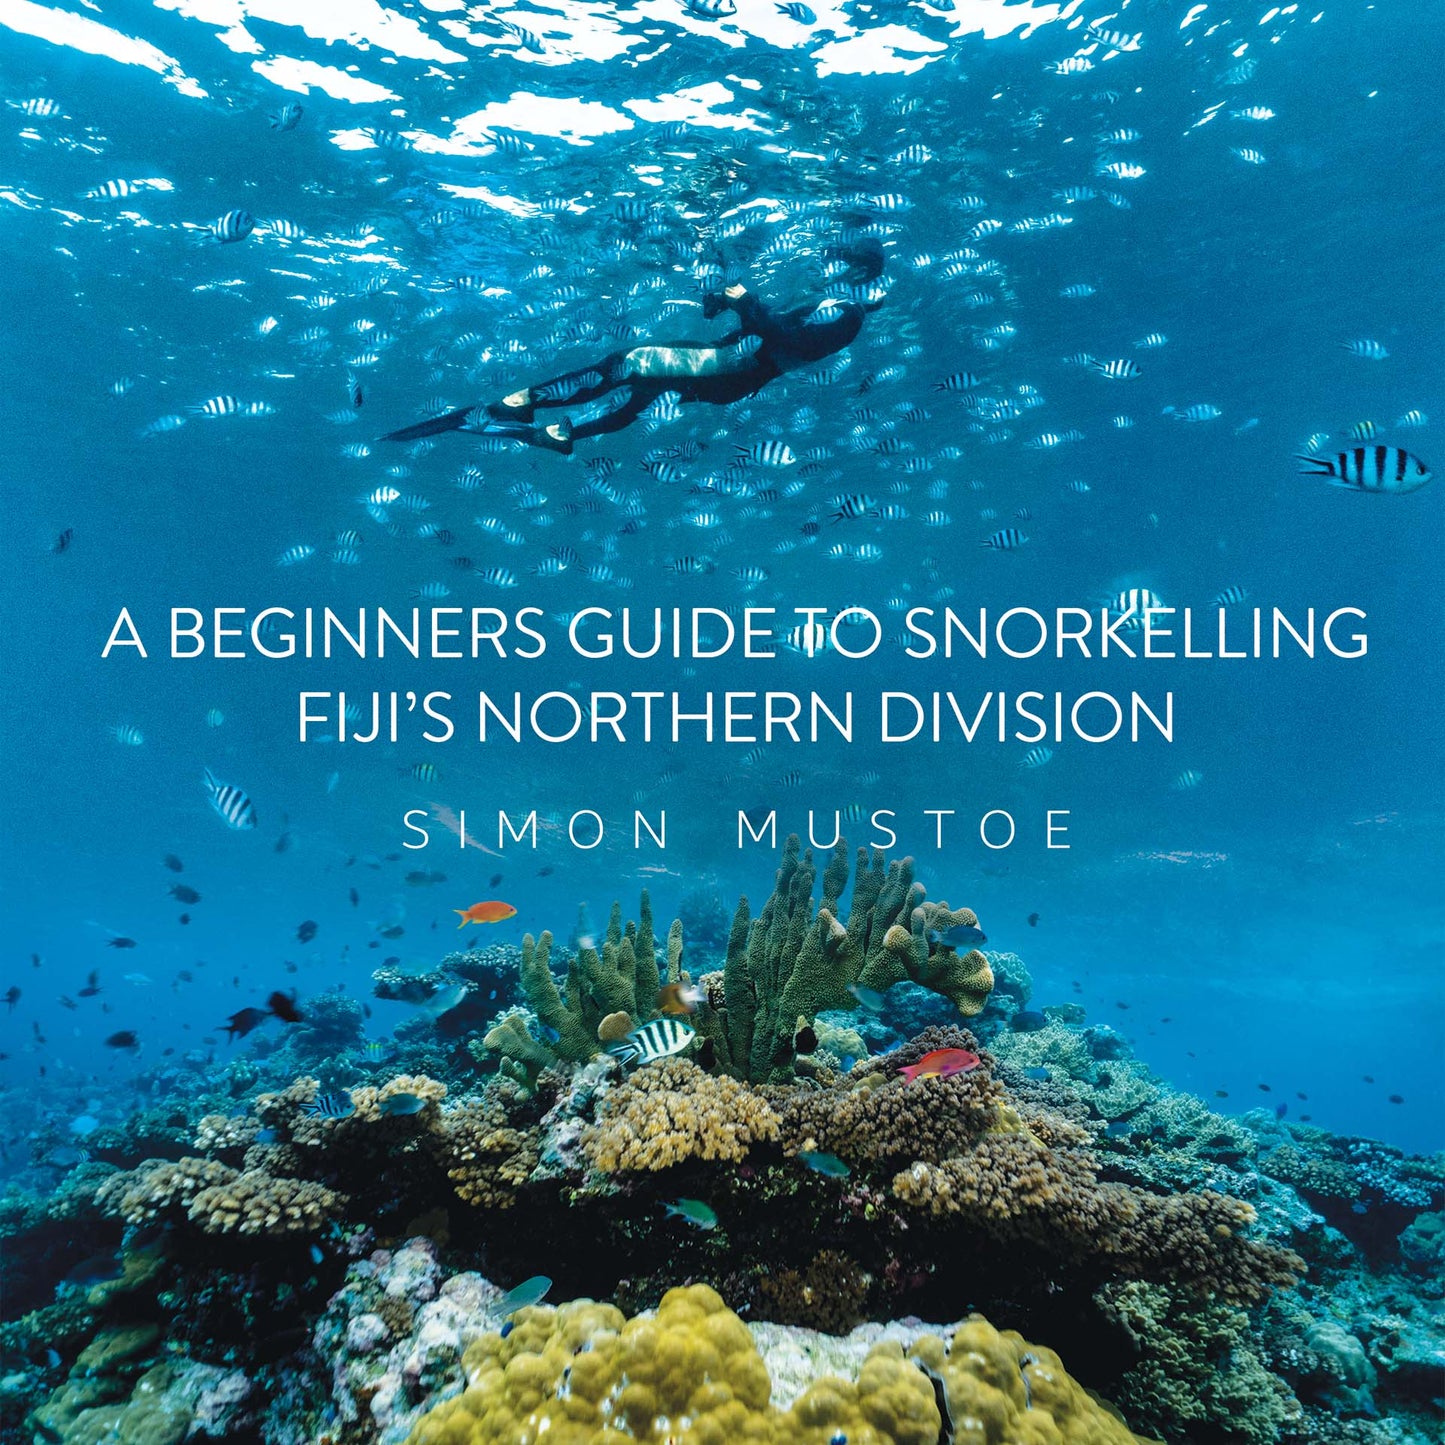 A Beginners Guide to Snorkelling Fiji's Northern Division